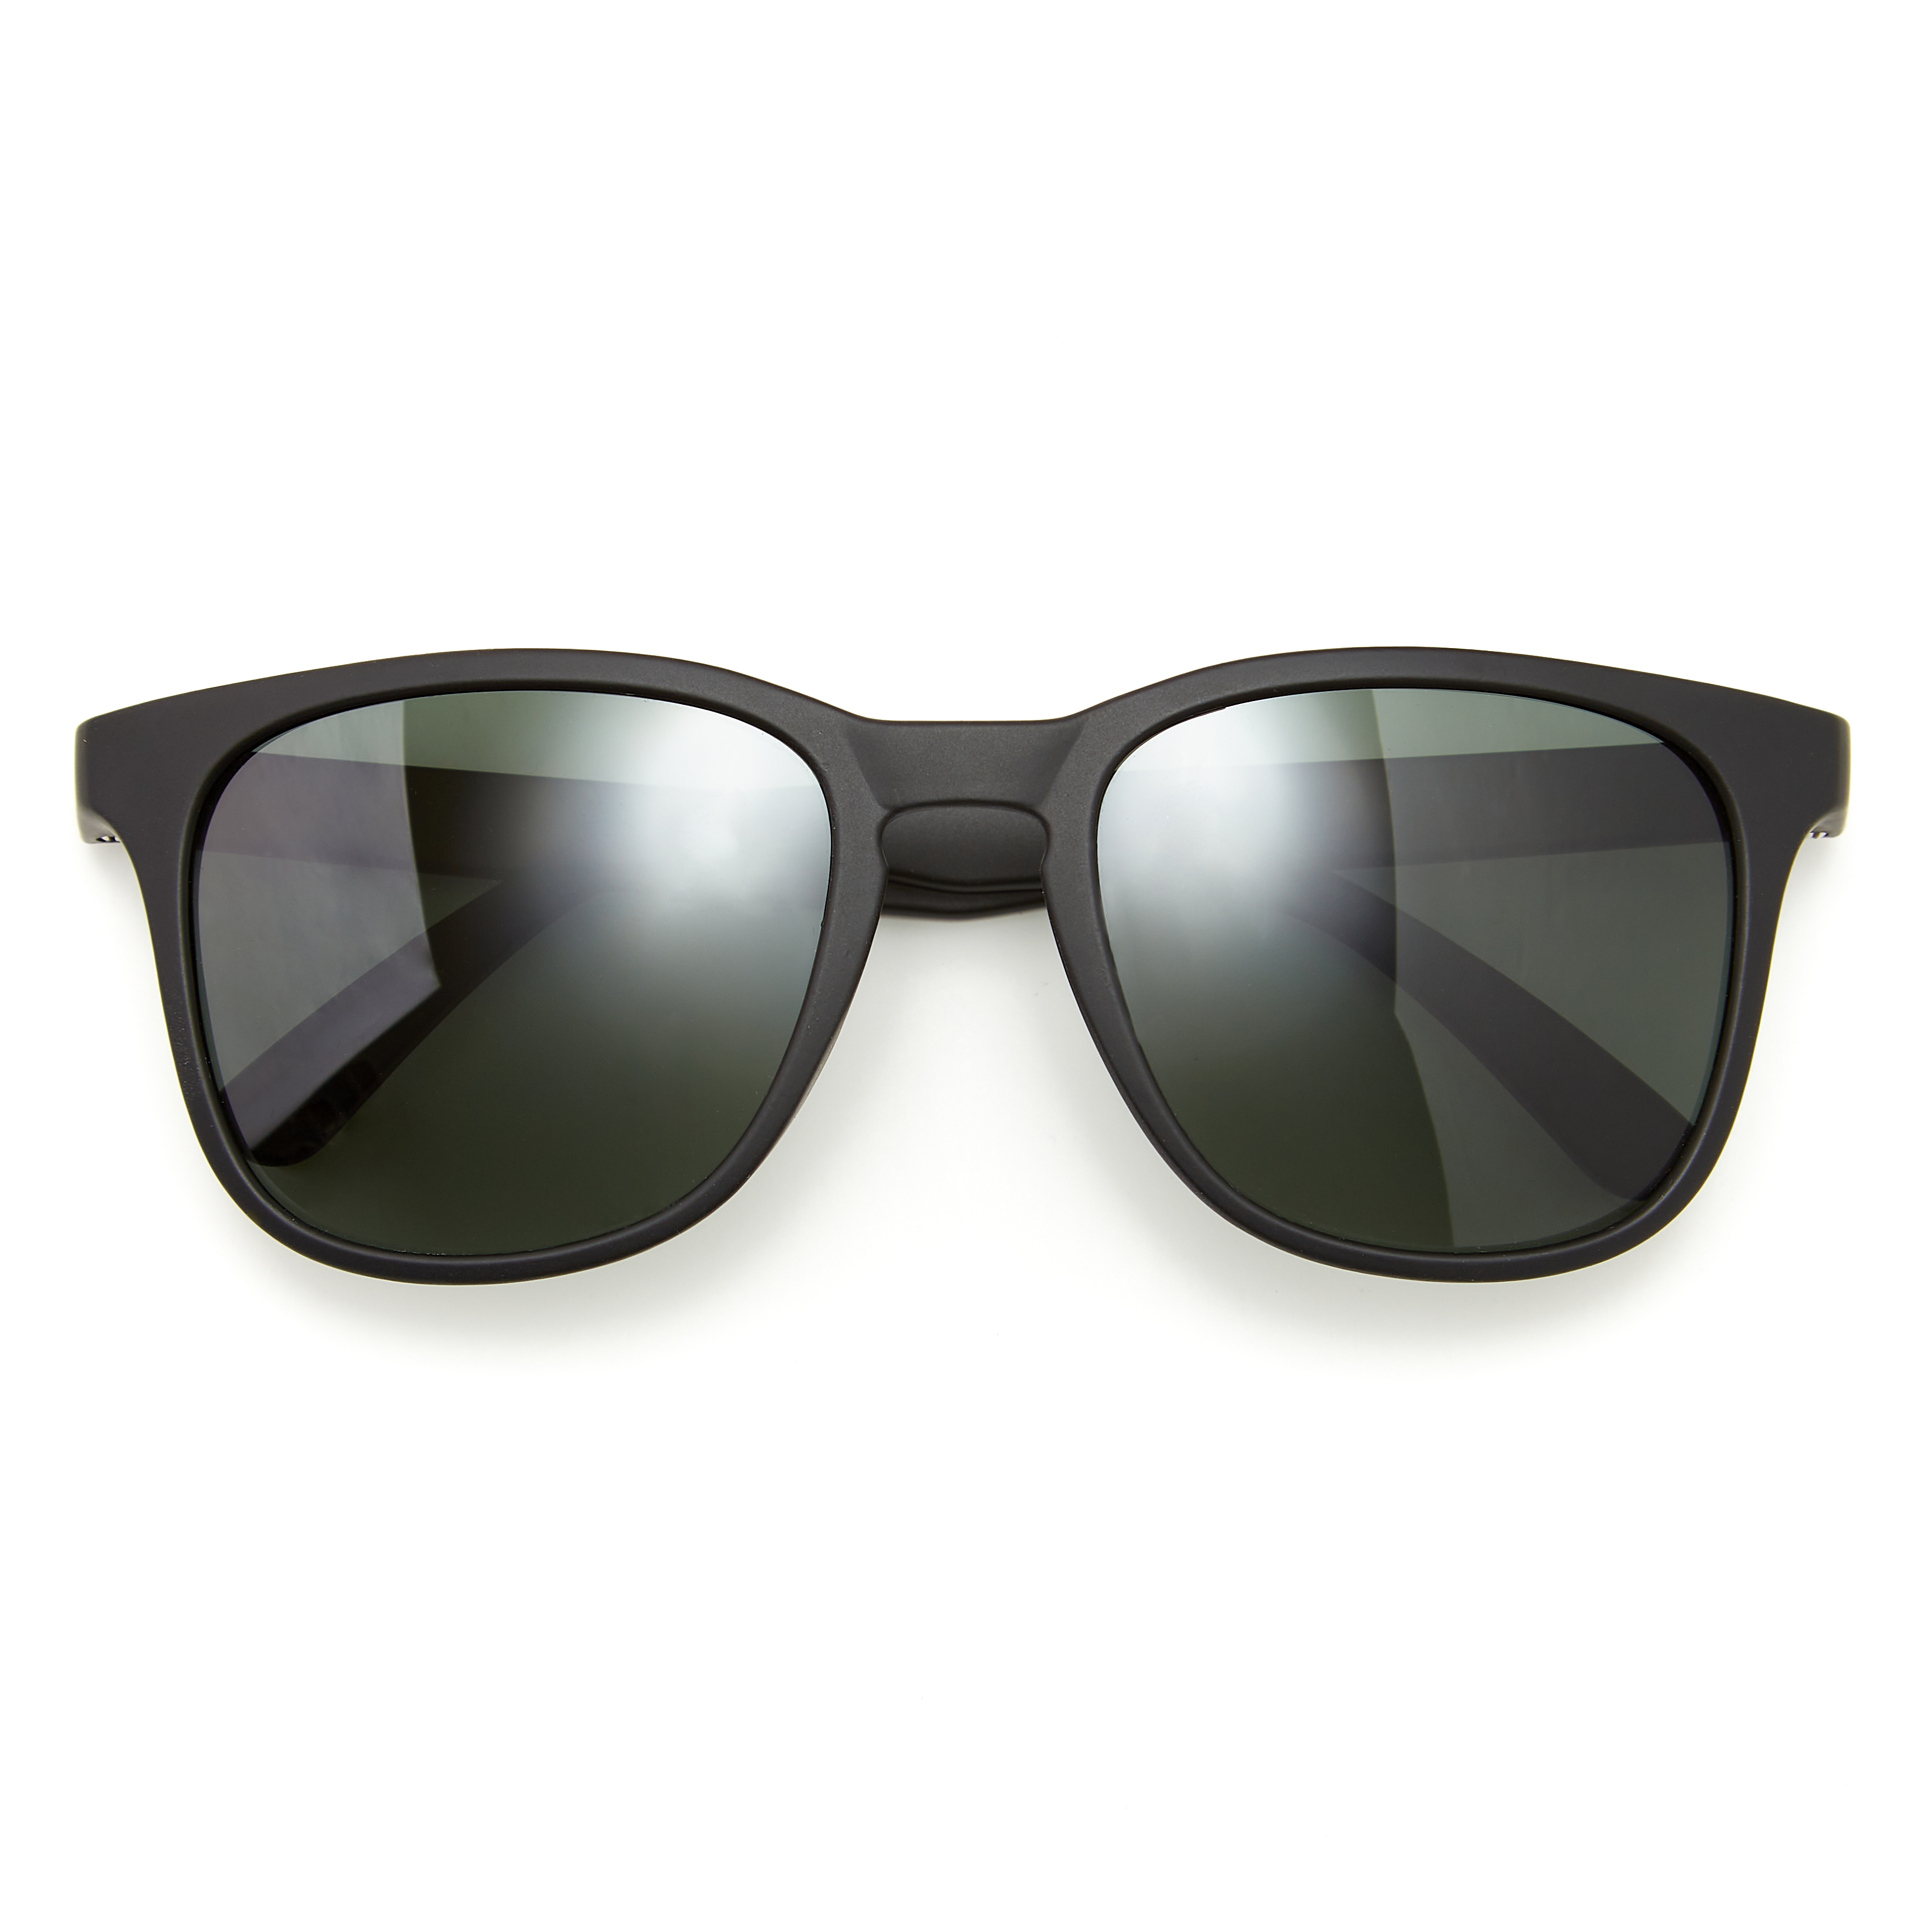 Sunglasses for men: Stylish sunglasses that are a must for sun